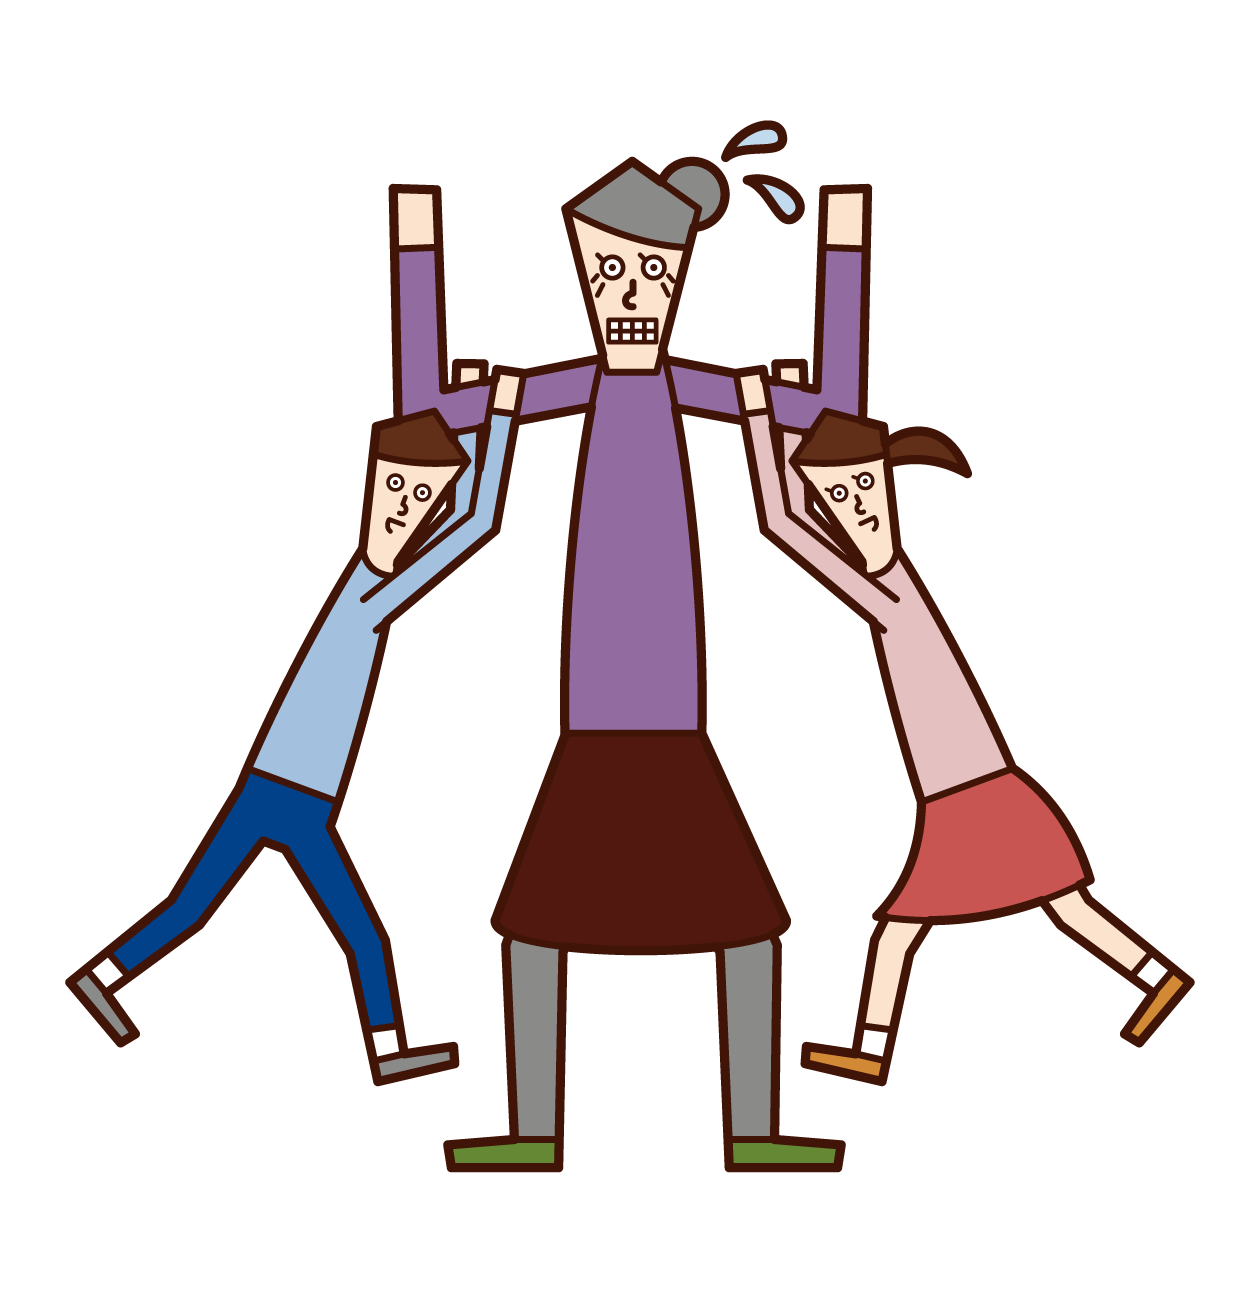 Illustration of an old man (woman) playing with children